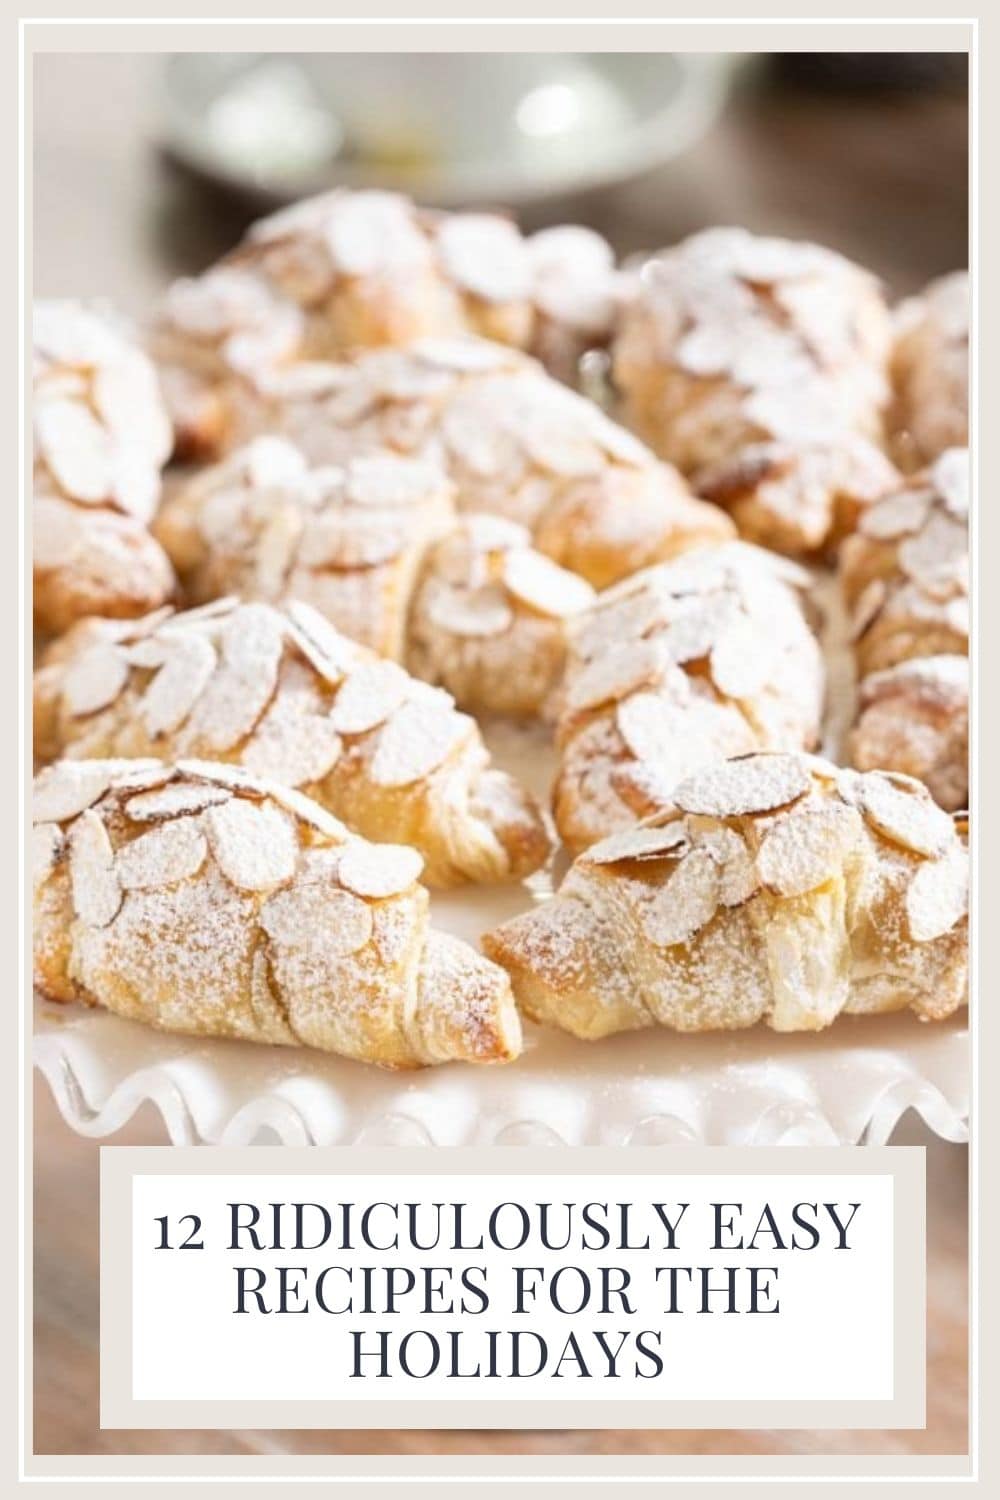 12 Ridiculously Easy Holiday Recipes to Save Your Sanity